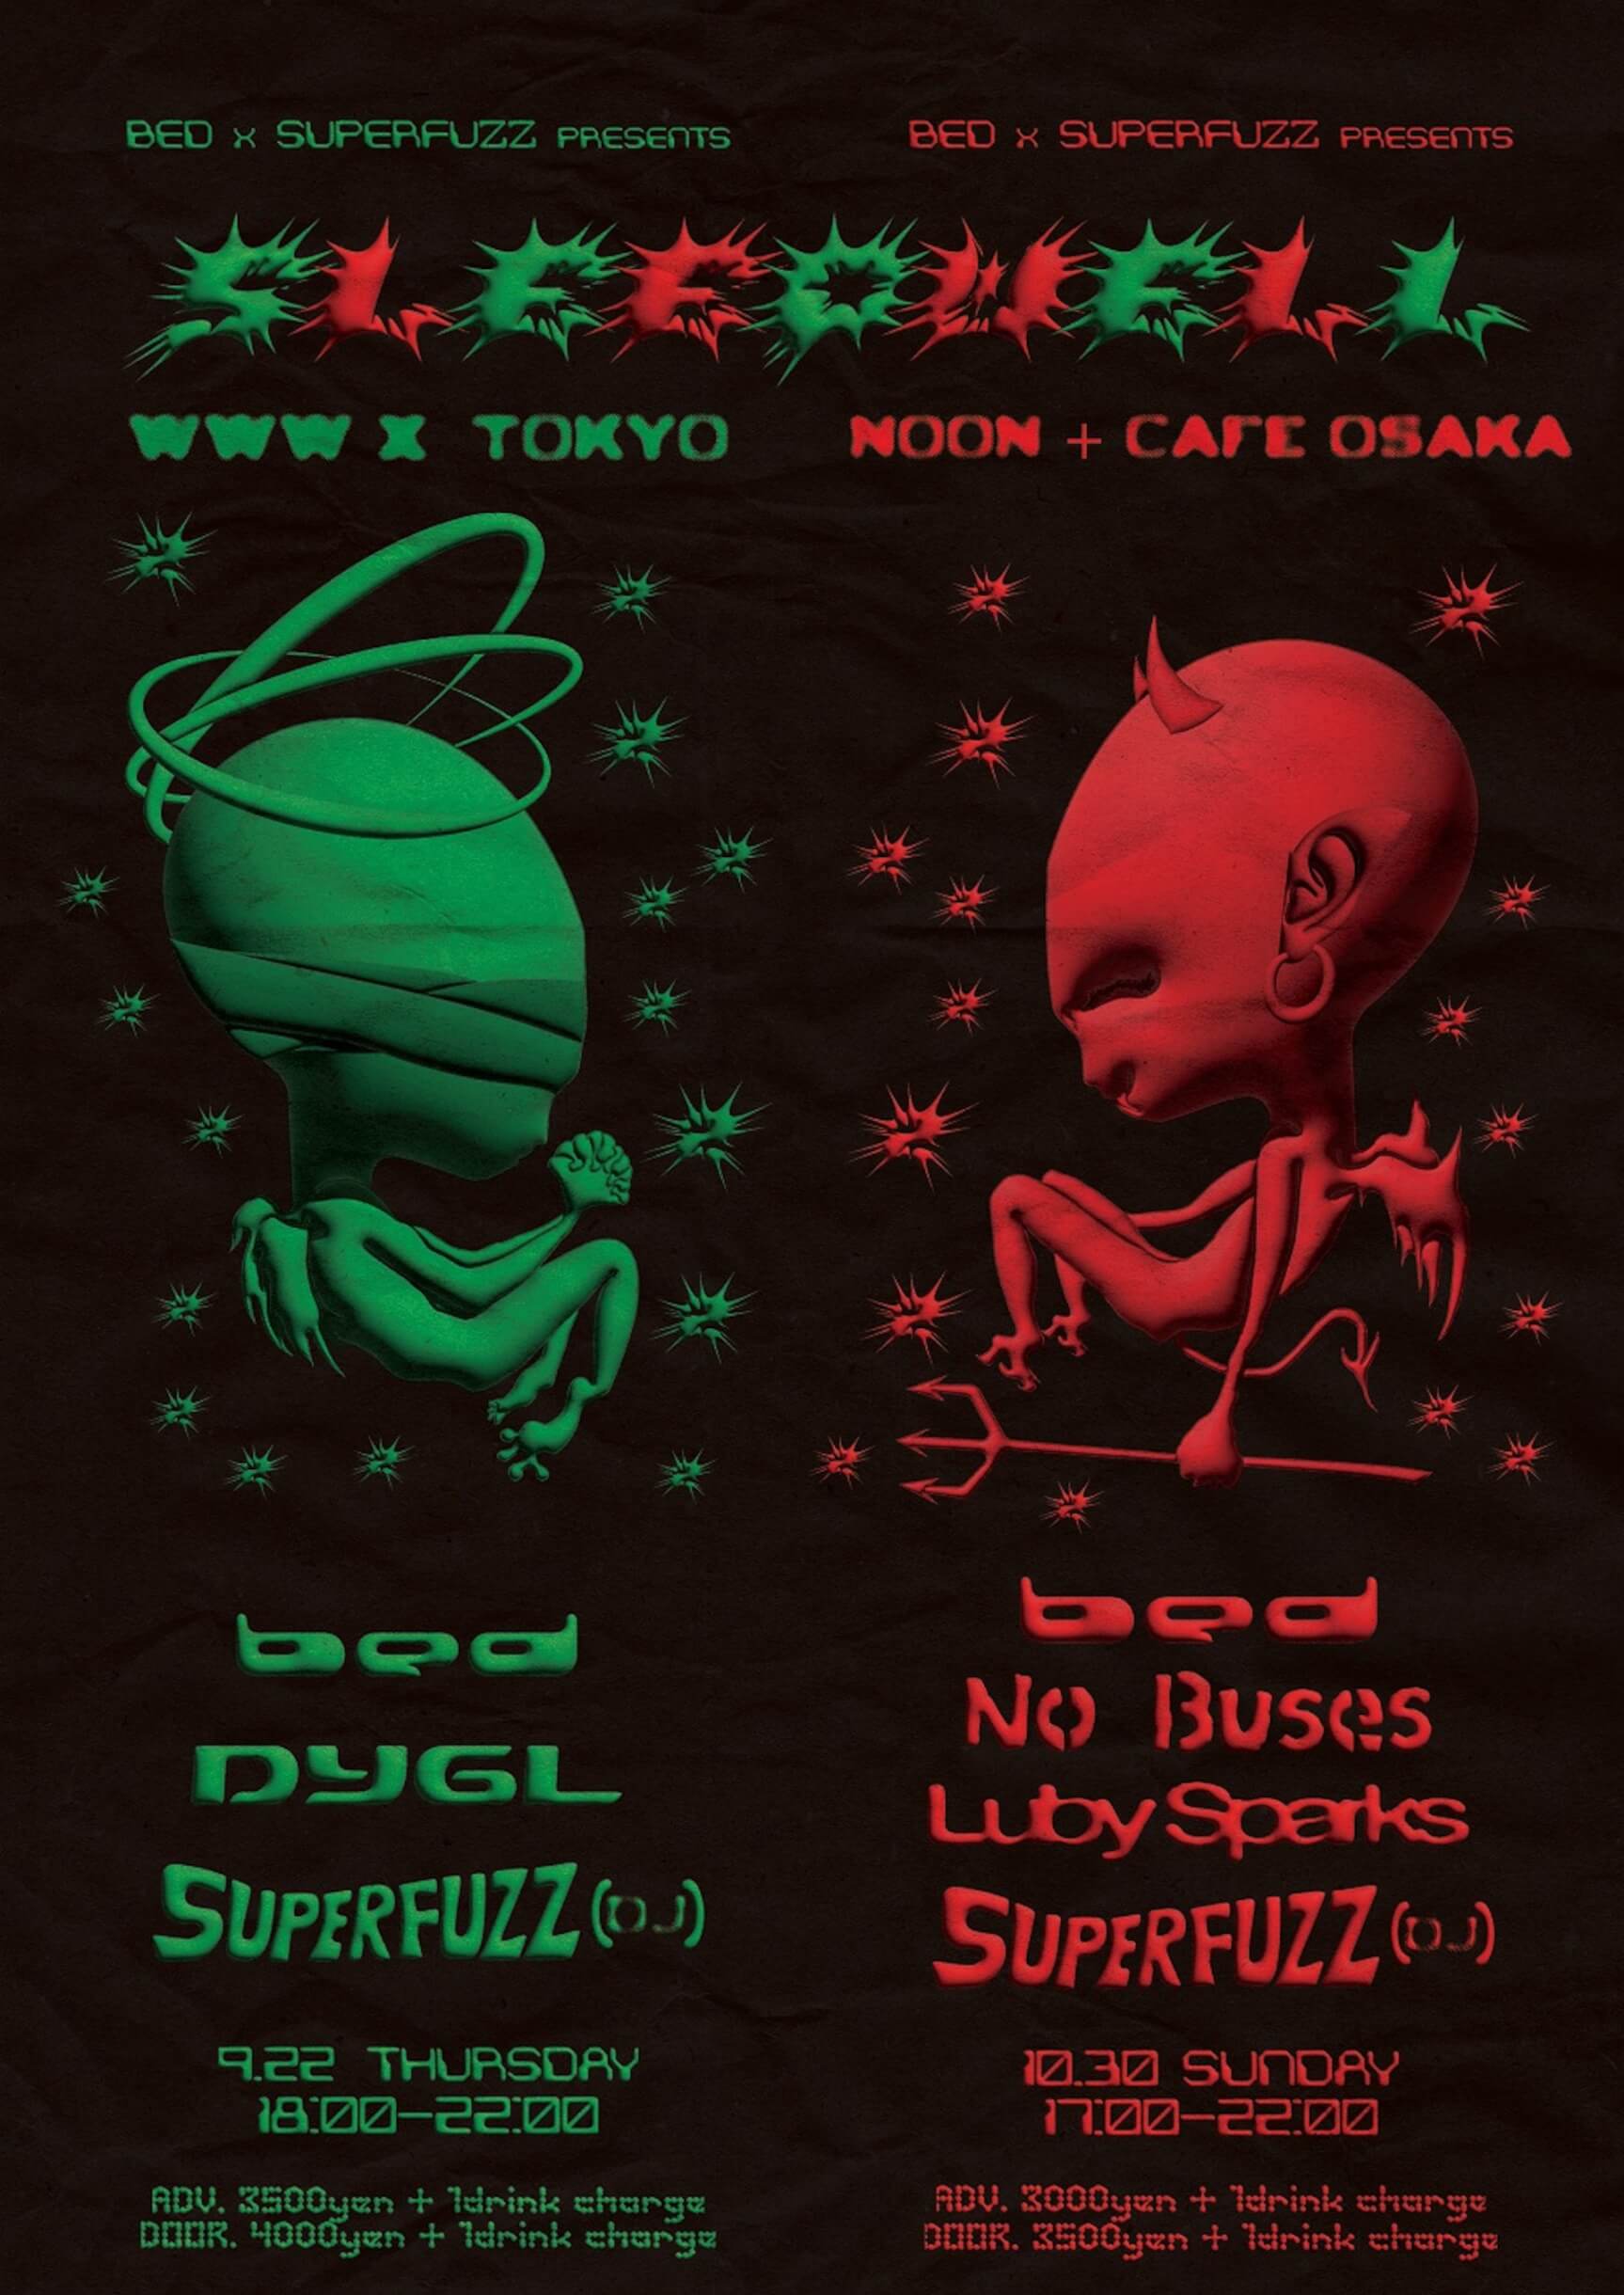 bedとSUPERFUZZによる新イベントにDYGL、No Buses、Luby Sparksらが出演｜渋谷WWW X、中崎町NOON + CAFEで開催 music220729_bed-superfuzz-01